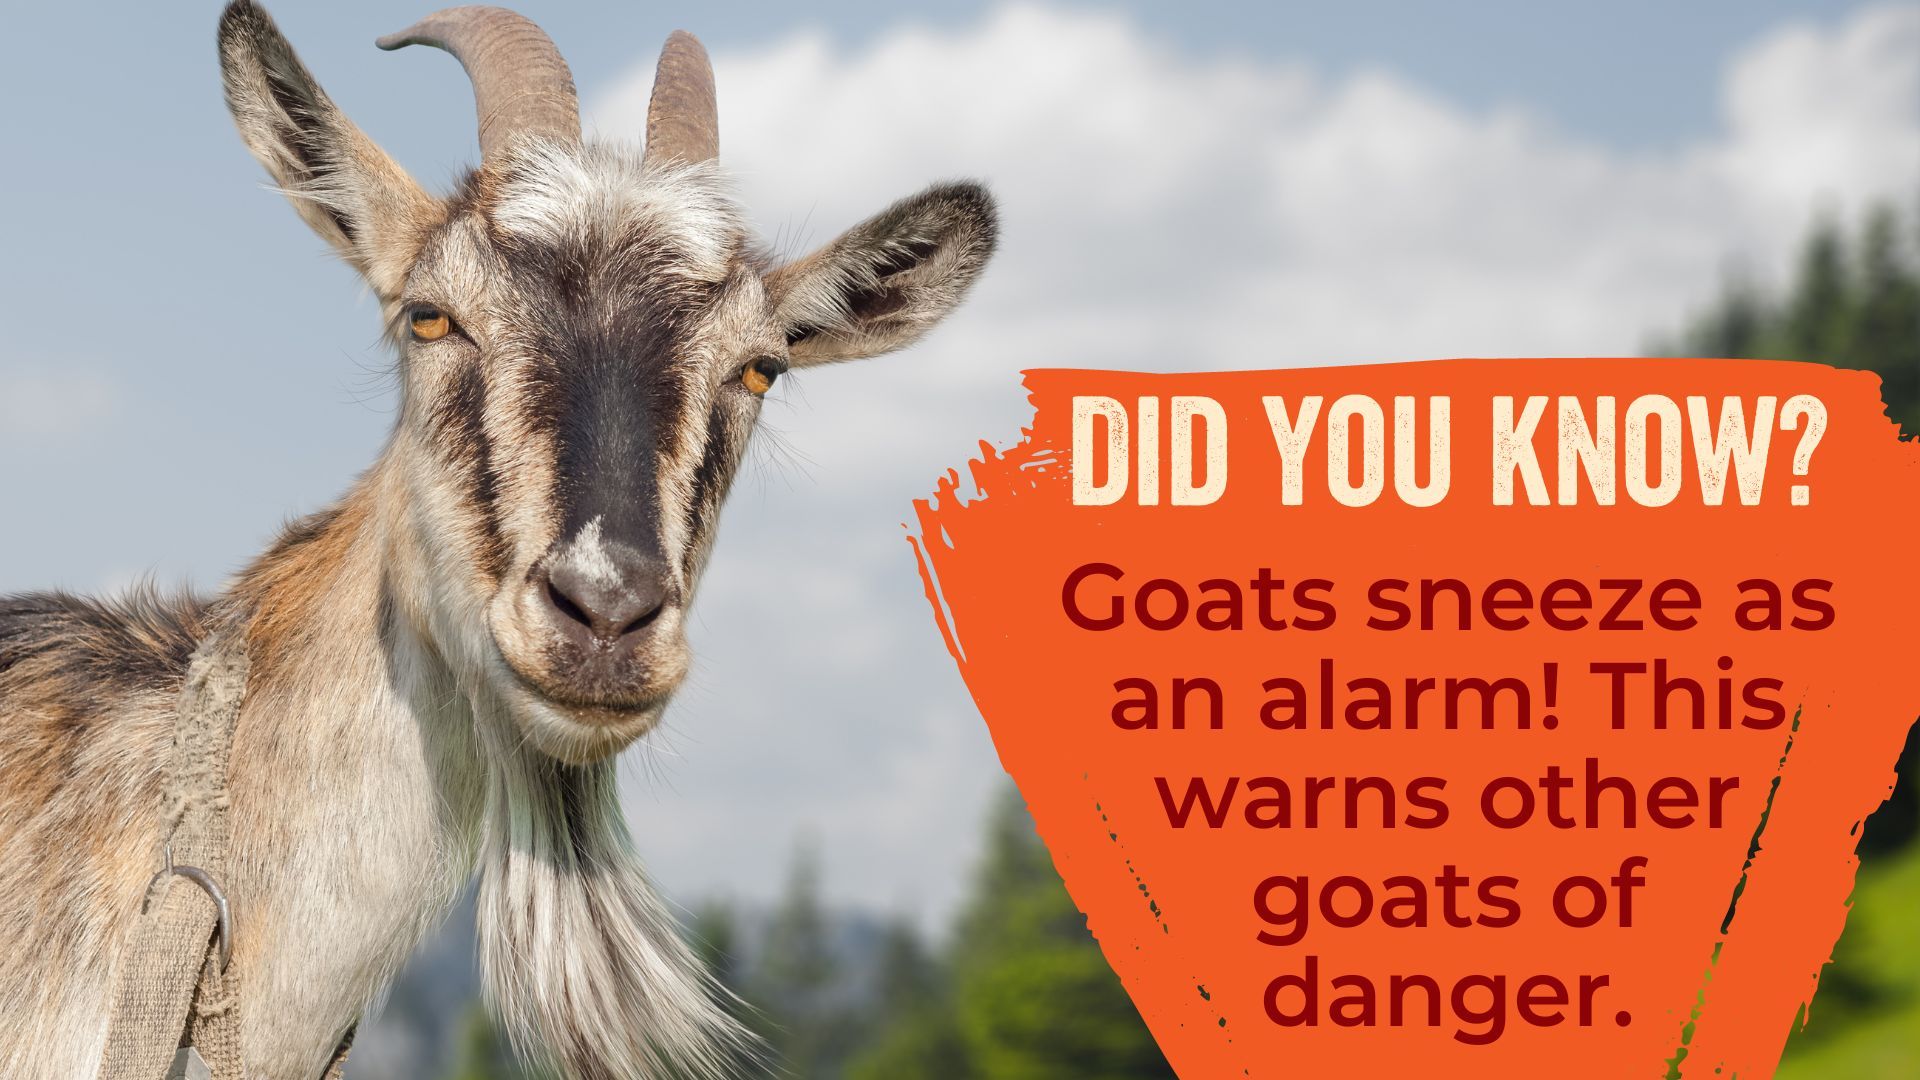 Goats sneeze as an alarm! This warns other goats of danger.